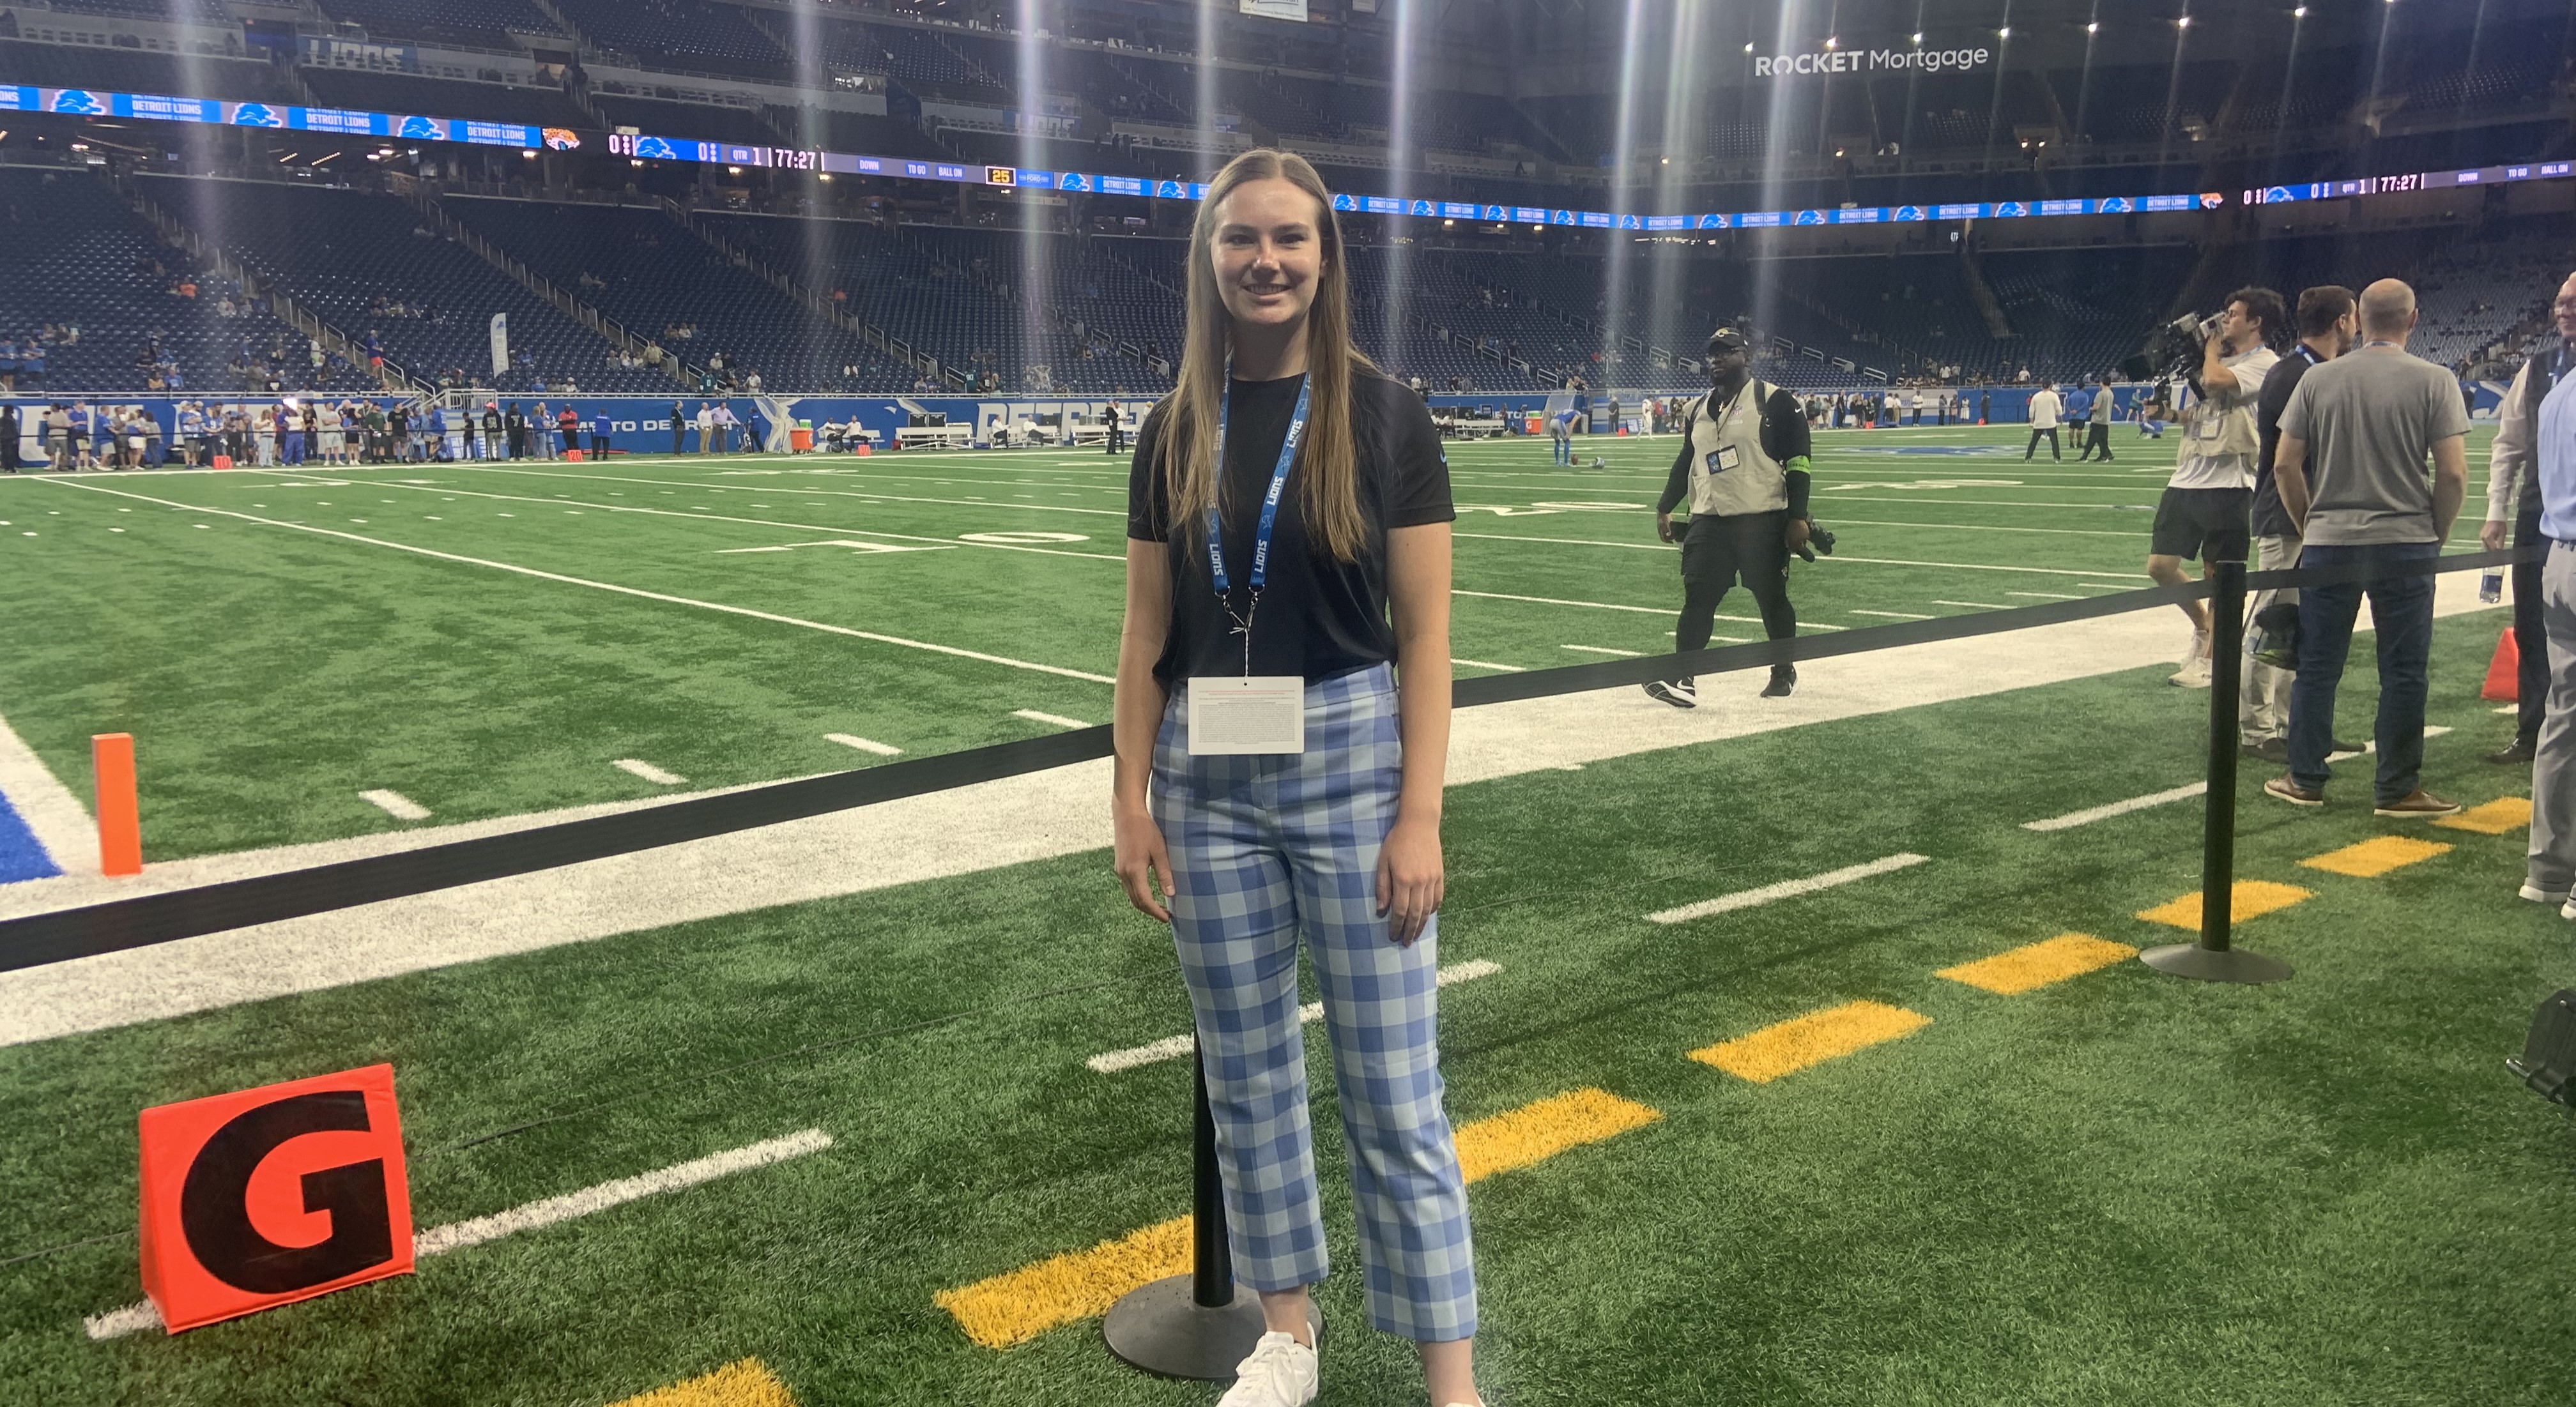 Erin Neaton wearing blue plaid pants, a dark shirt, and a lanyard stands on the sidelines of the Detroit Lions football field before a game..